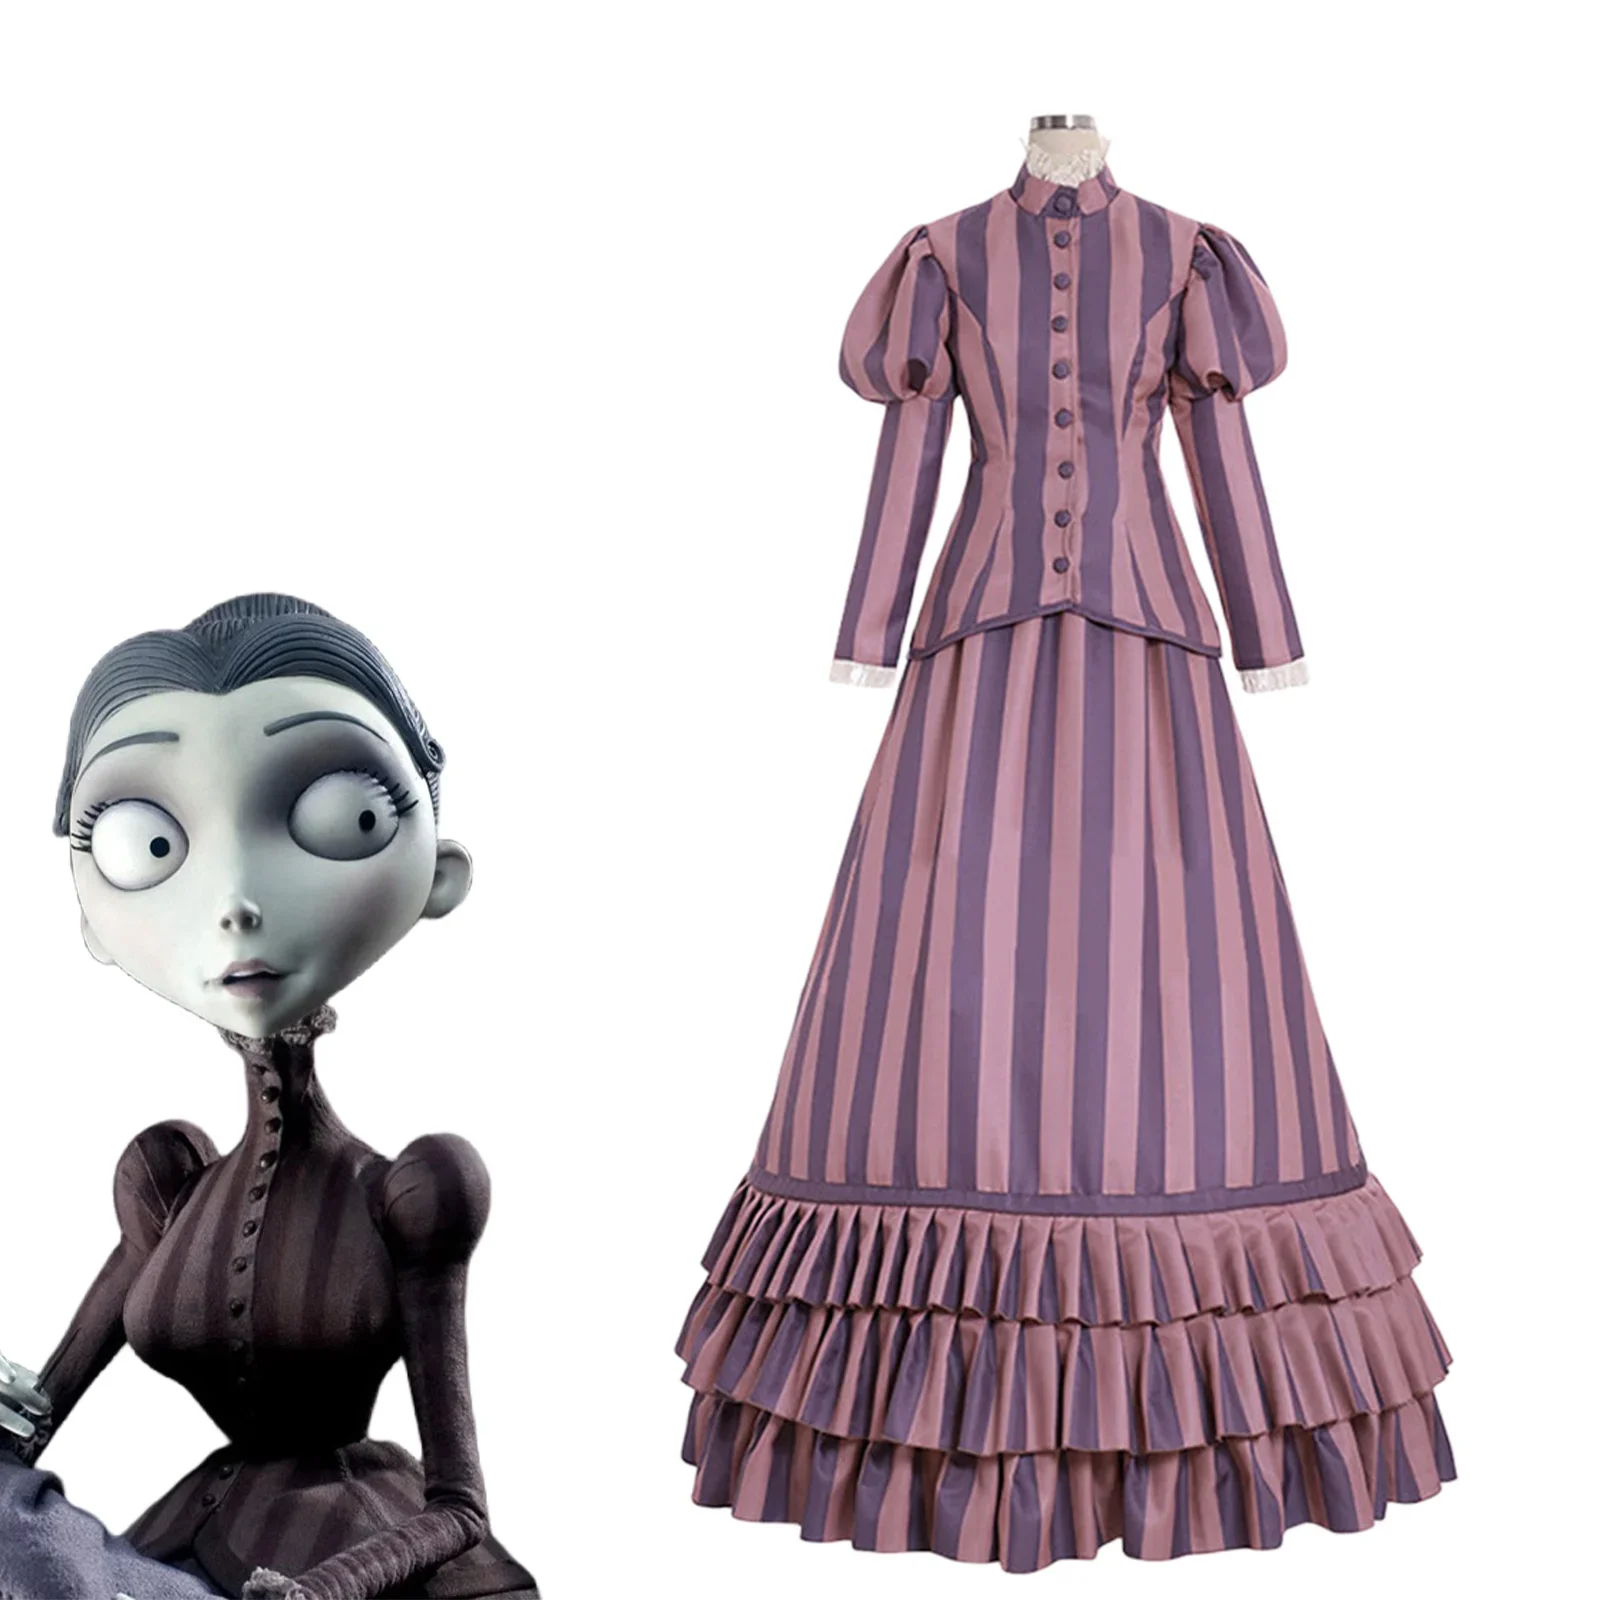 

Anime Tim Burton's Corpse Bride Cosplay Costume for Women Red Striped Dress Ruffles A Line Skirt Halloween Party Role Play Suit